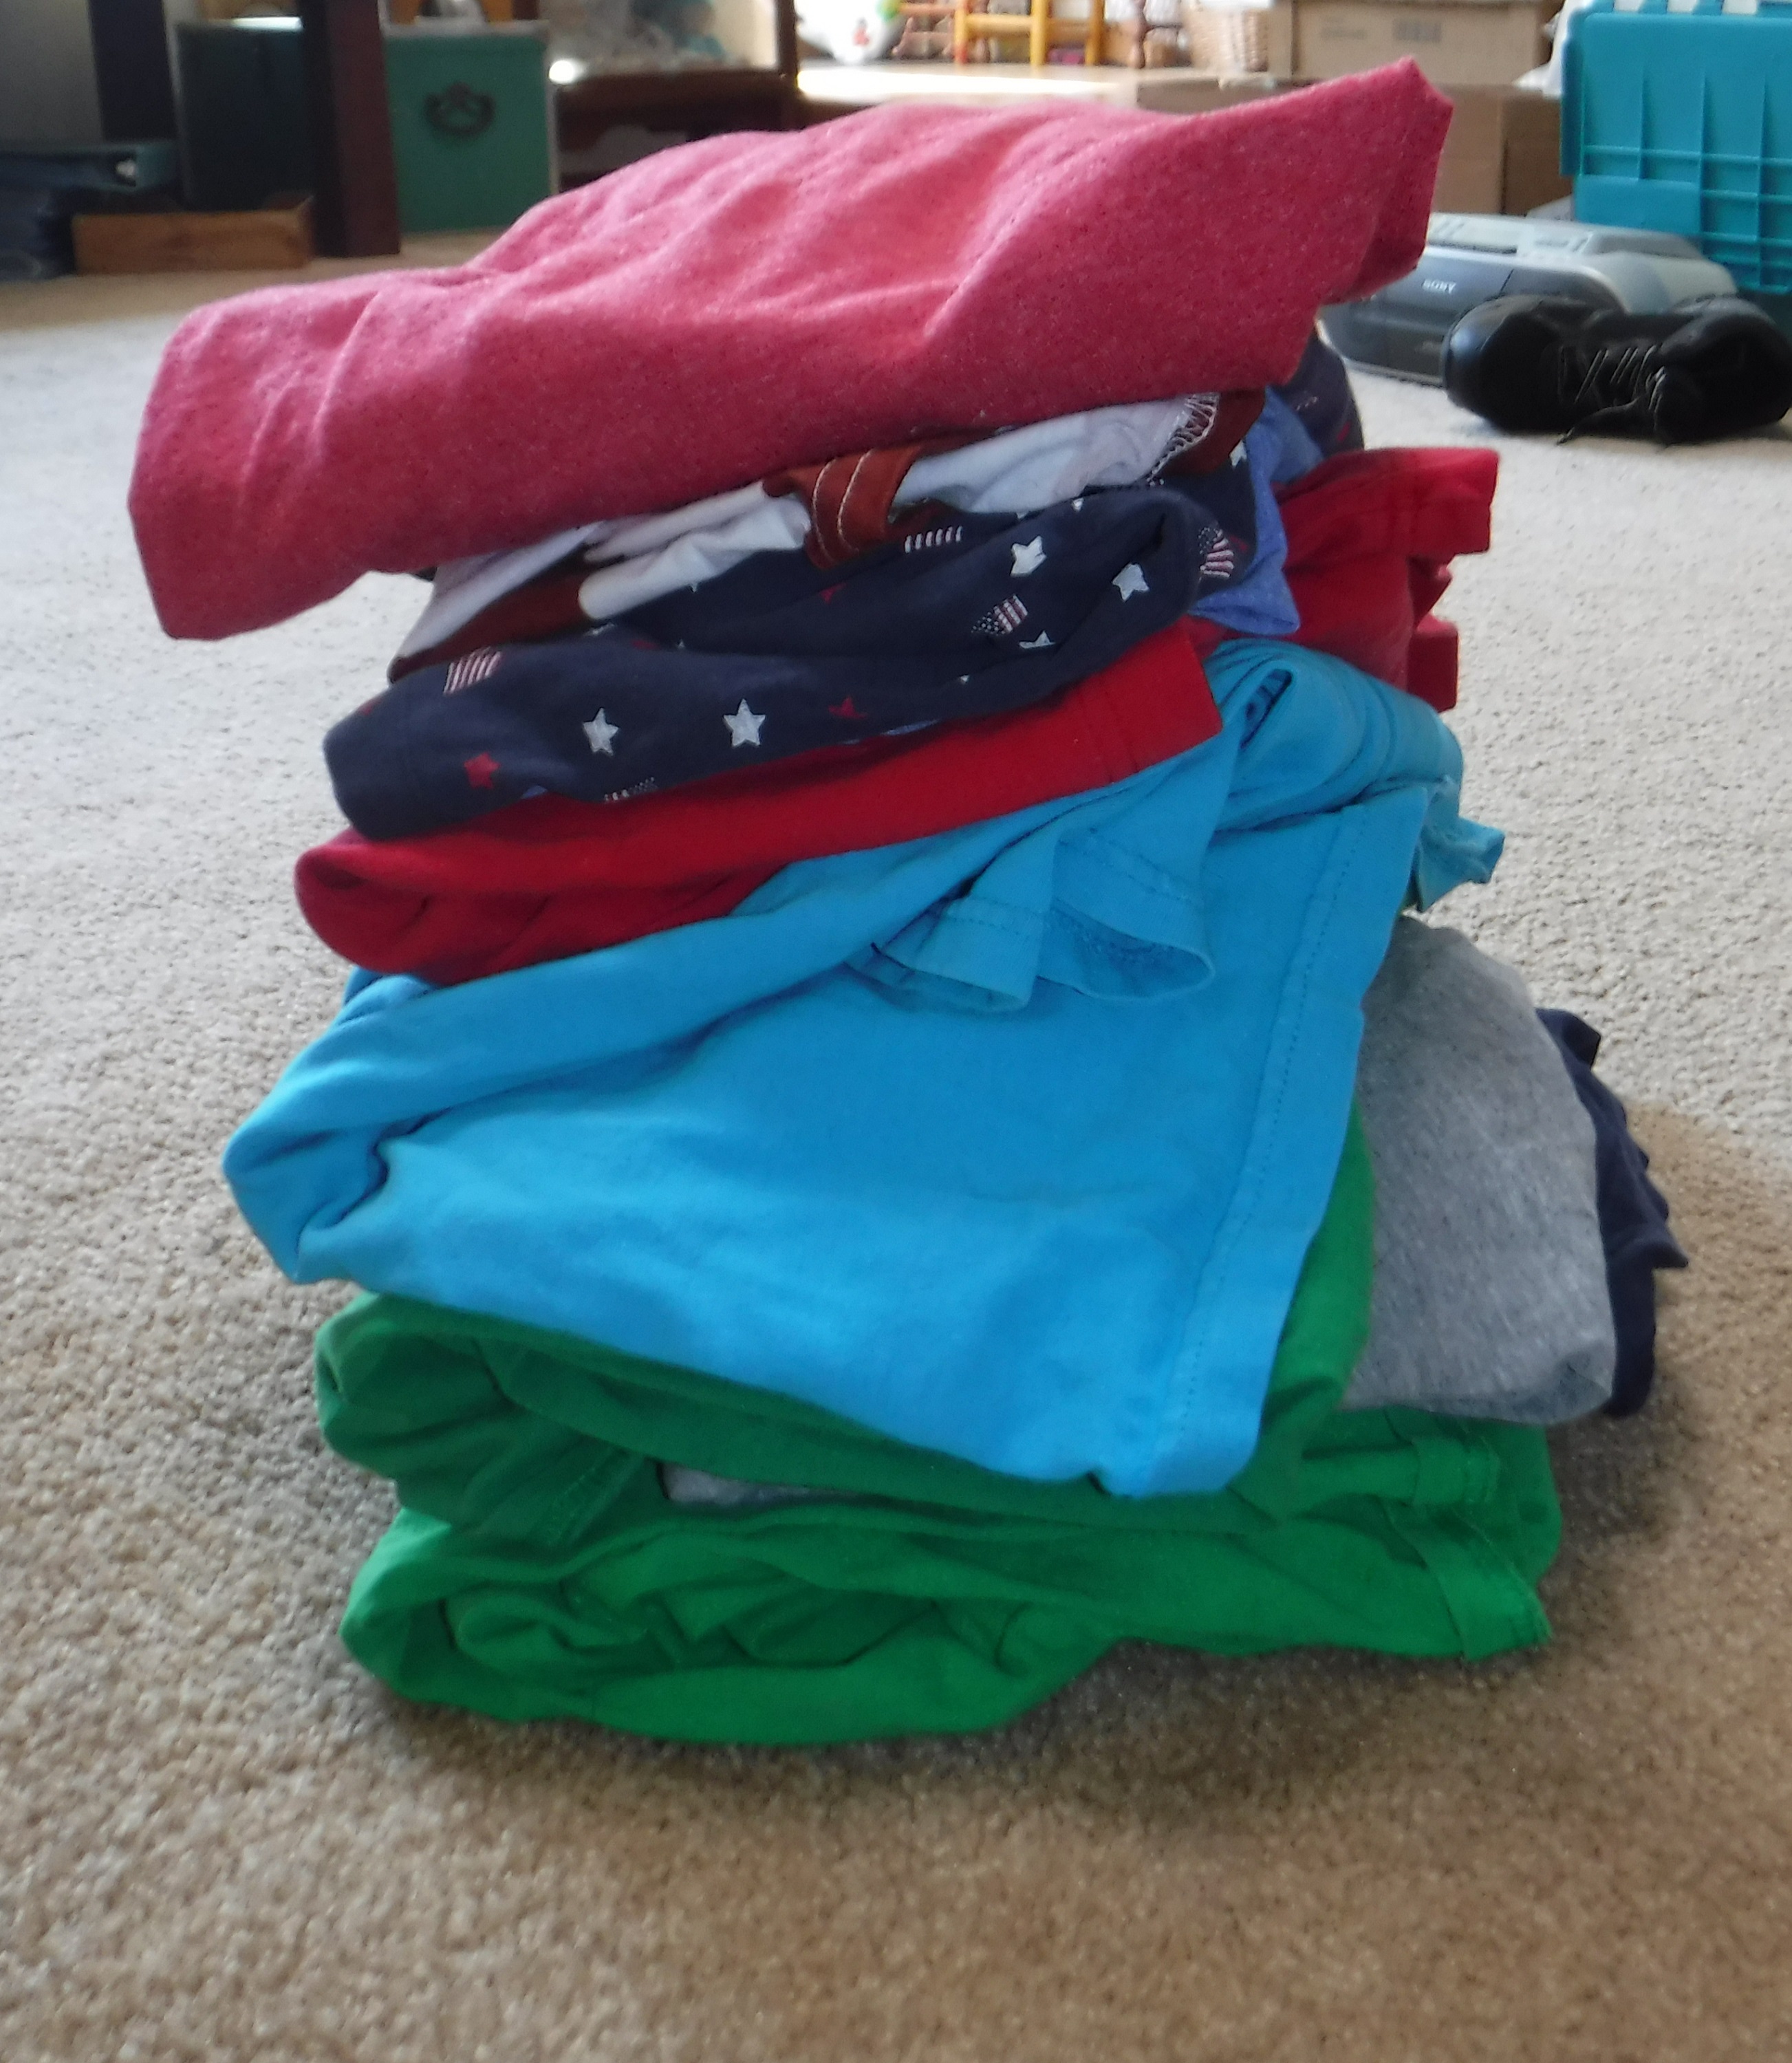 Photo I took of one of my piles of laundry